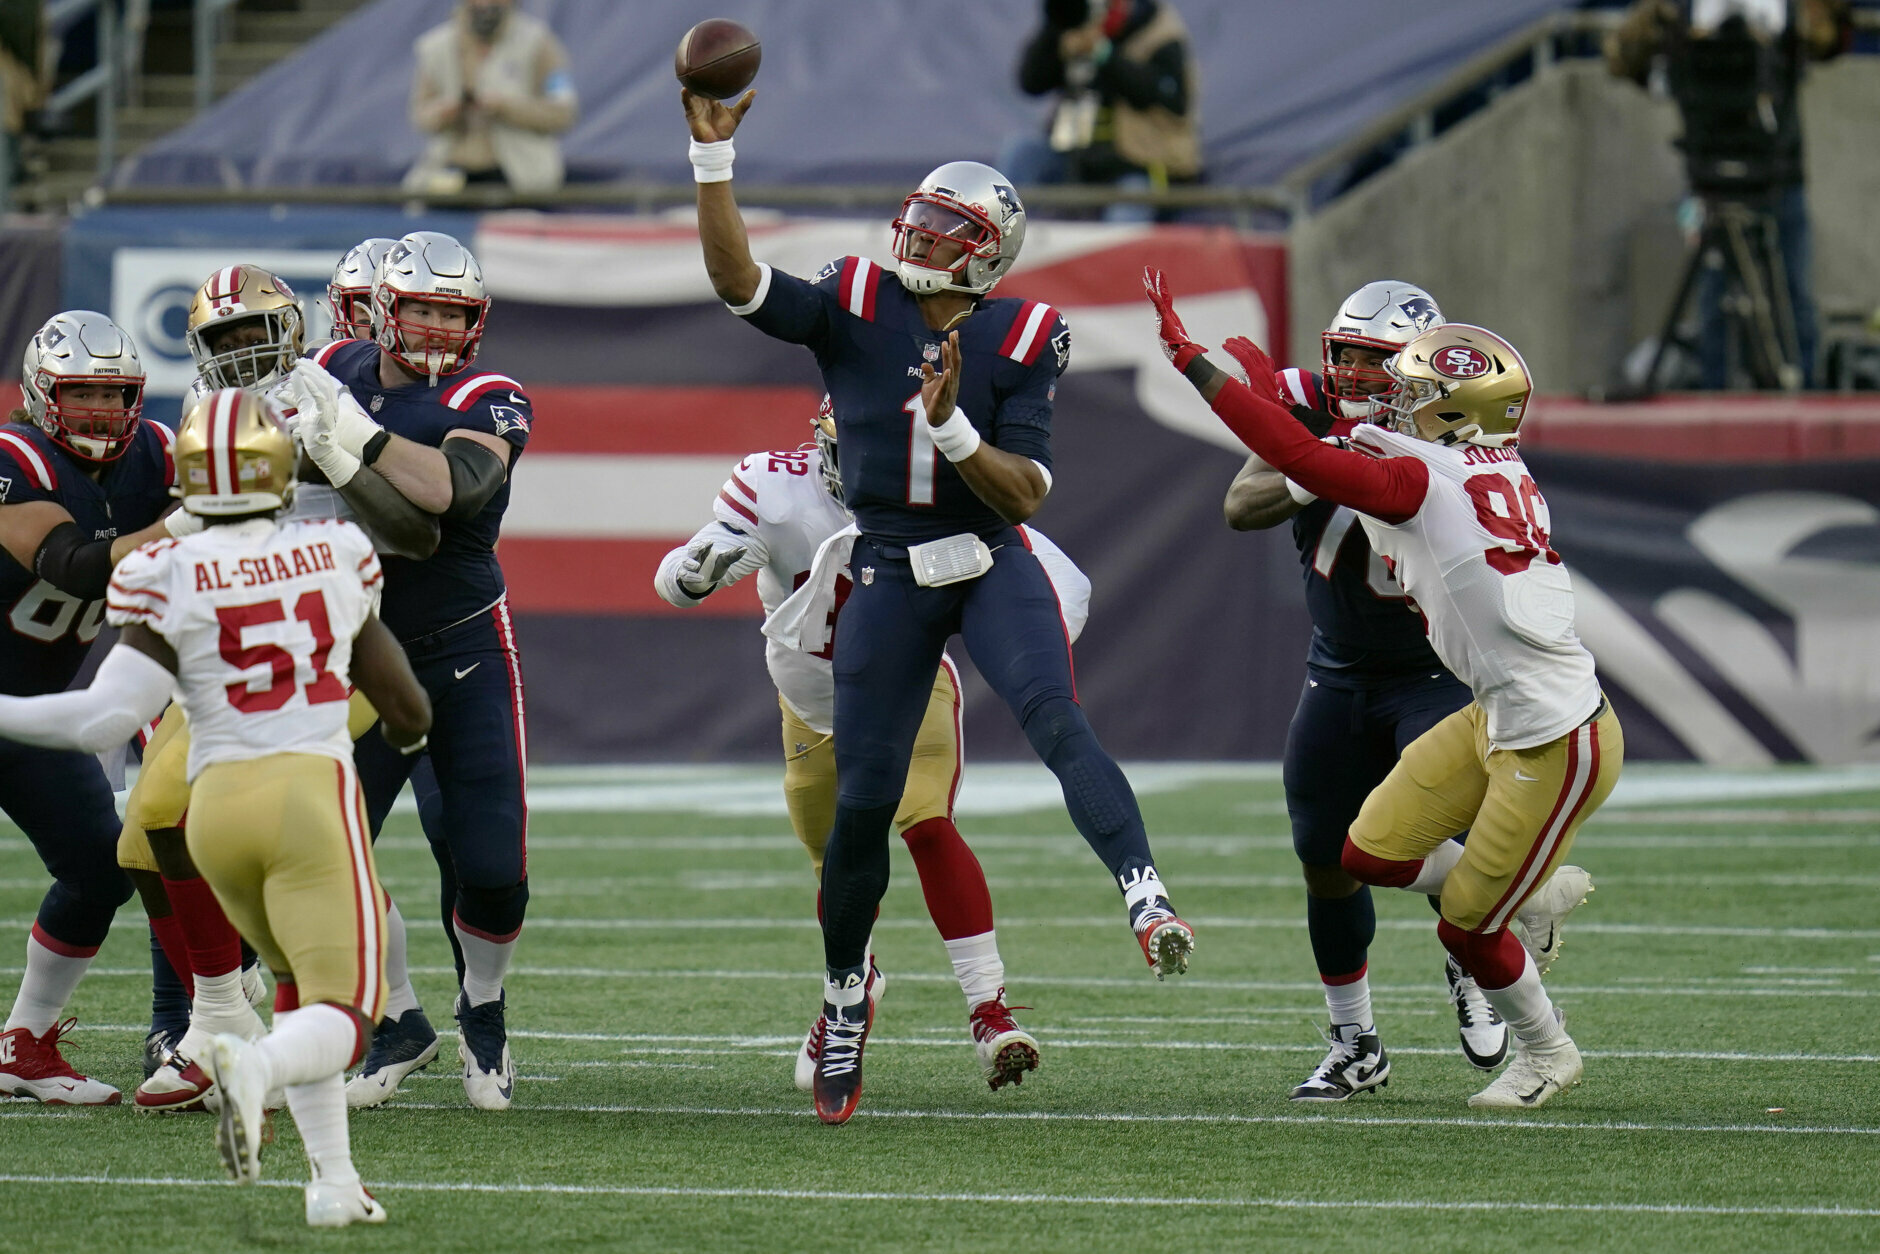 <p><b><i>49ers 33</i></b><br />
<b><i>Patriots 6</i></b></p>
<p>New England&#8217;s worst home loss of the Bill Belichick era not only took Jimmy G off the hook for his unimpressive return to his old stomping grounds, but it also was the latest chapter in the Patriots&#8217; <a href="https://twitter.com/ESPNStatsInfo/status/1320505349200355331?s=20  ">worst passing season in nearly a half century</a>. While it&#8217;s easy to revel in what is shaping up to be the Pats&#8217; worst season in 18 years, it&#8217;s equally as easy to point out they followed up that 7-9 season in 2002 with back-to-back Super Bowls. I&#8217;m not counting this king dead until I&#8217;ve seen the autopsy.</p>
